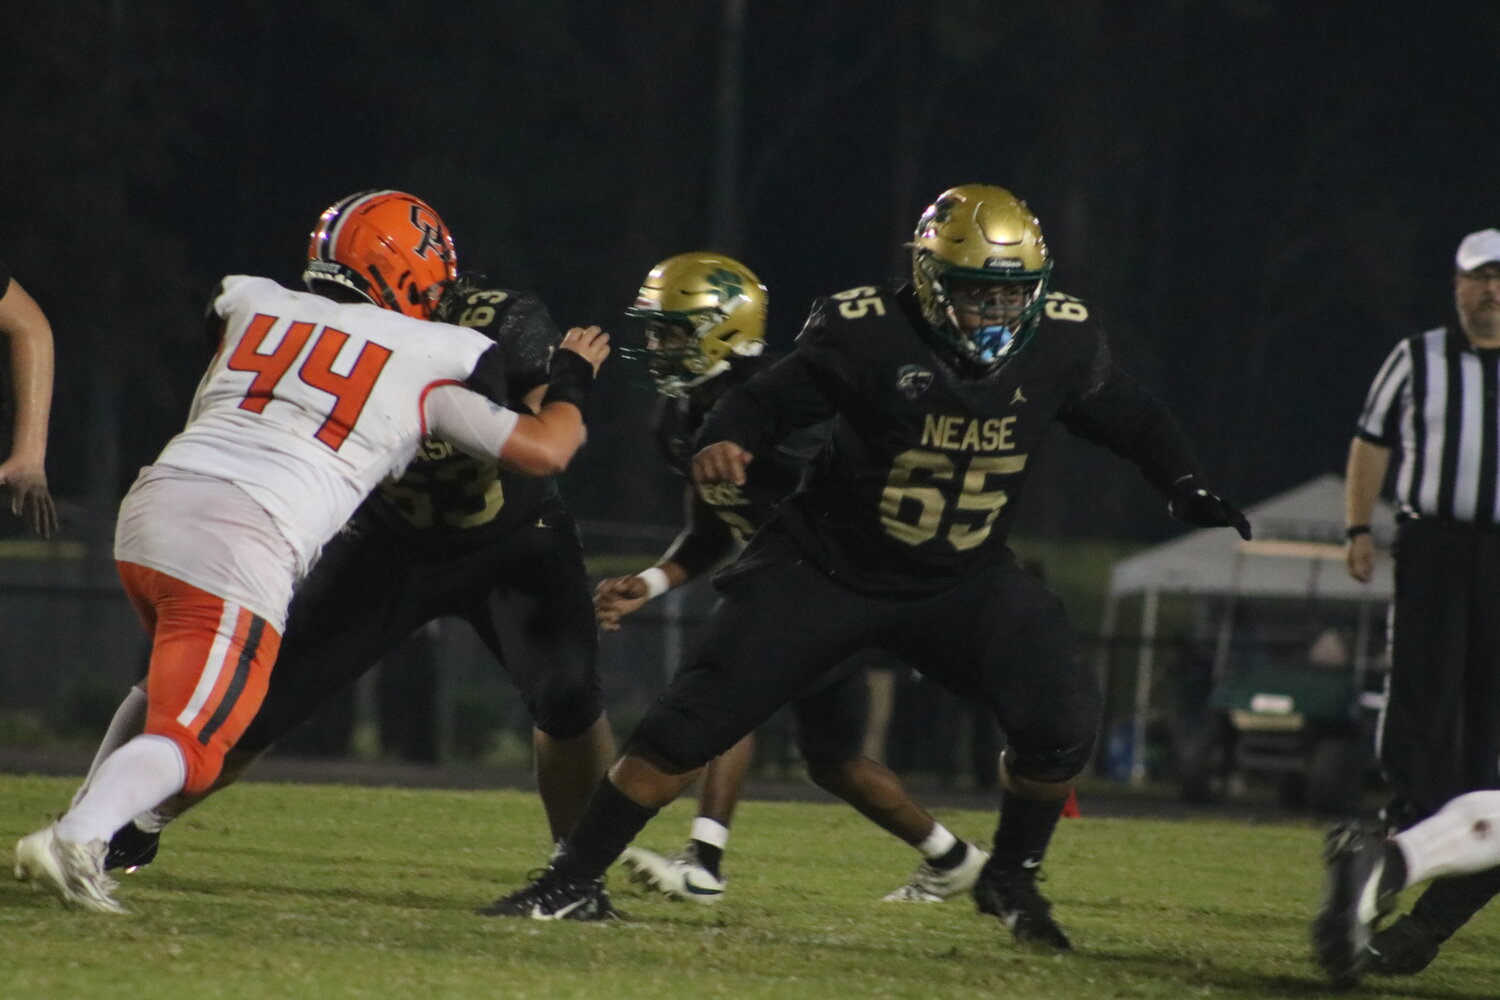 The Panthers welcomed back senior center Demarco Blackmon who made a difference in the win over Orange Park in his return from injury last week.